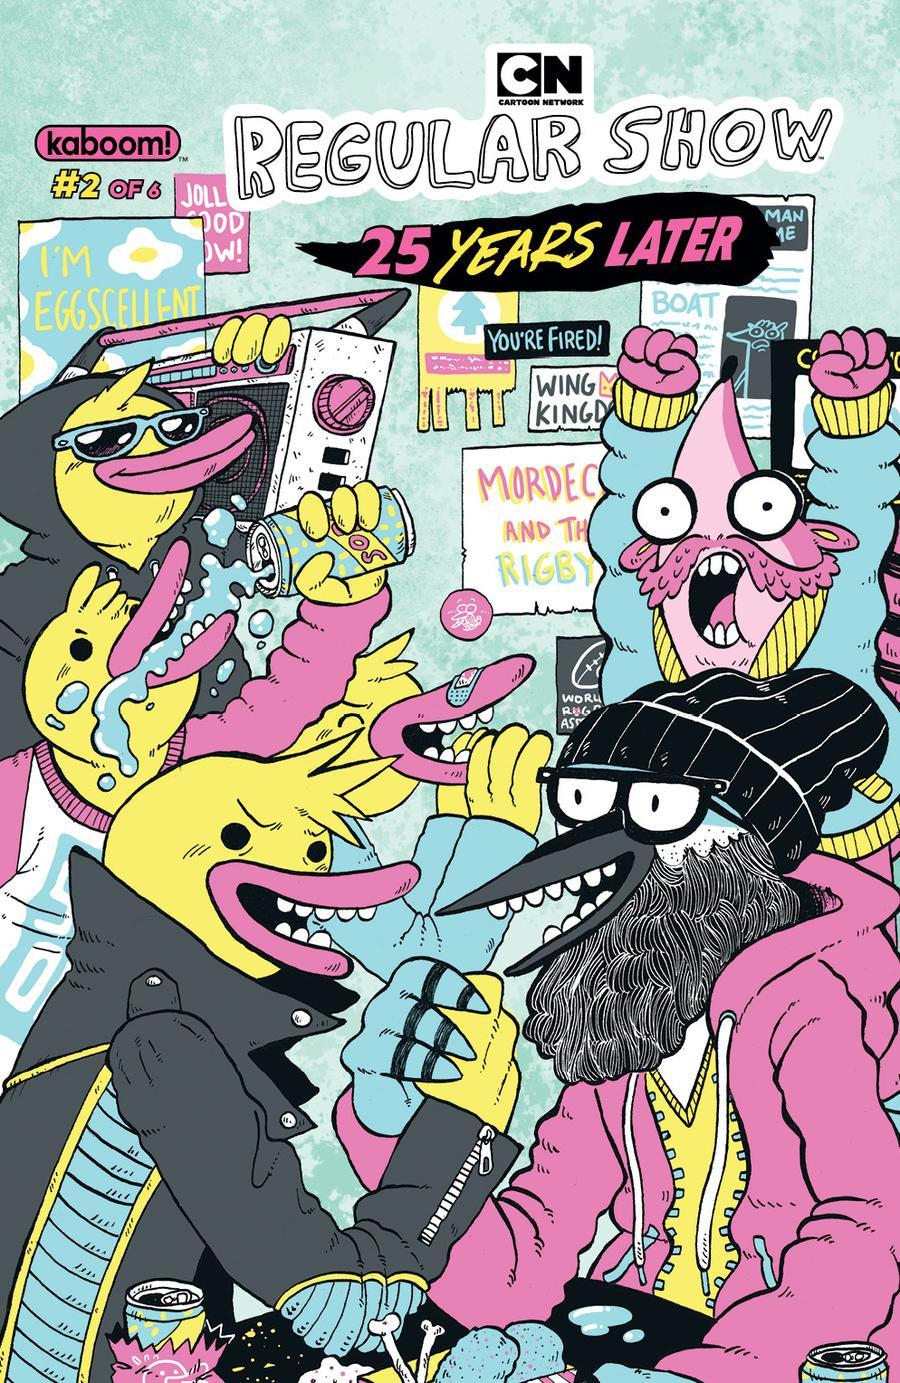 Regular Show 25 Years Later Vol. 1 #2